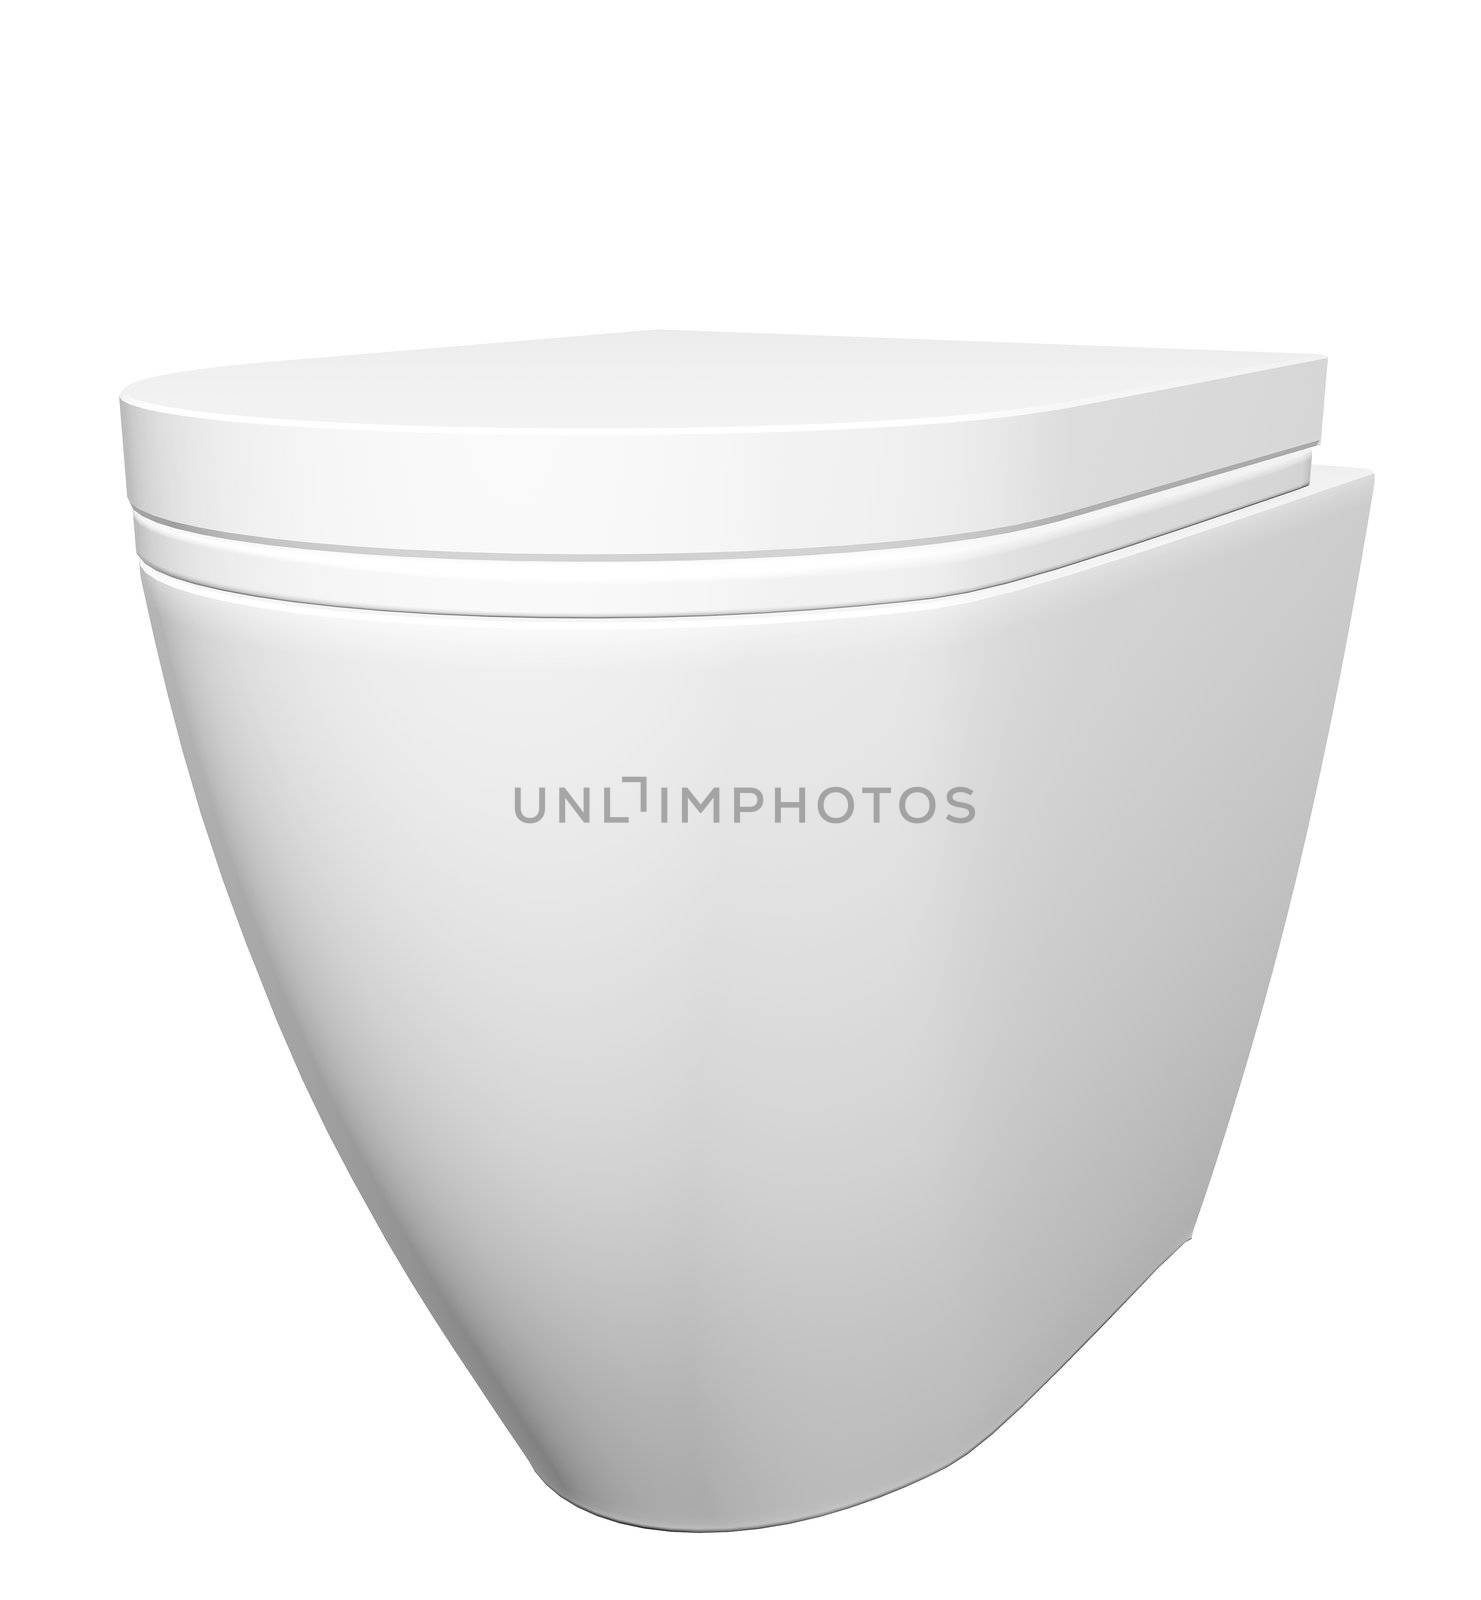 Modern white ceramic and acrylic toilet by Morphart